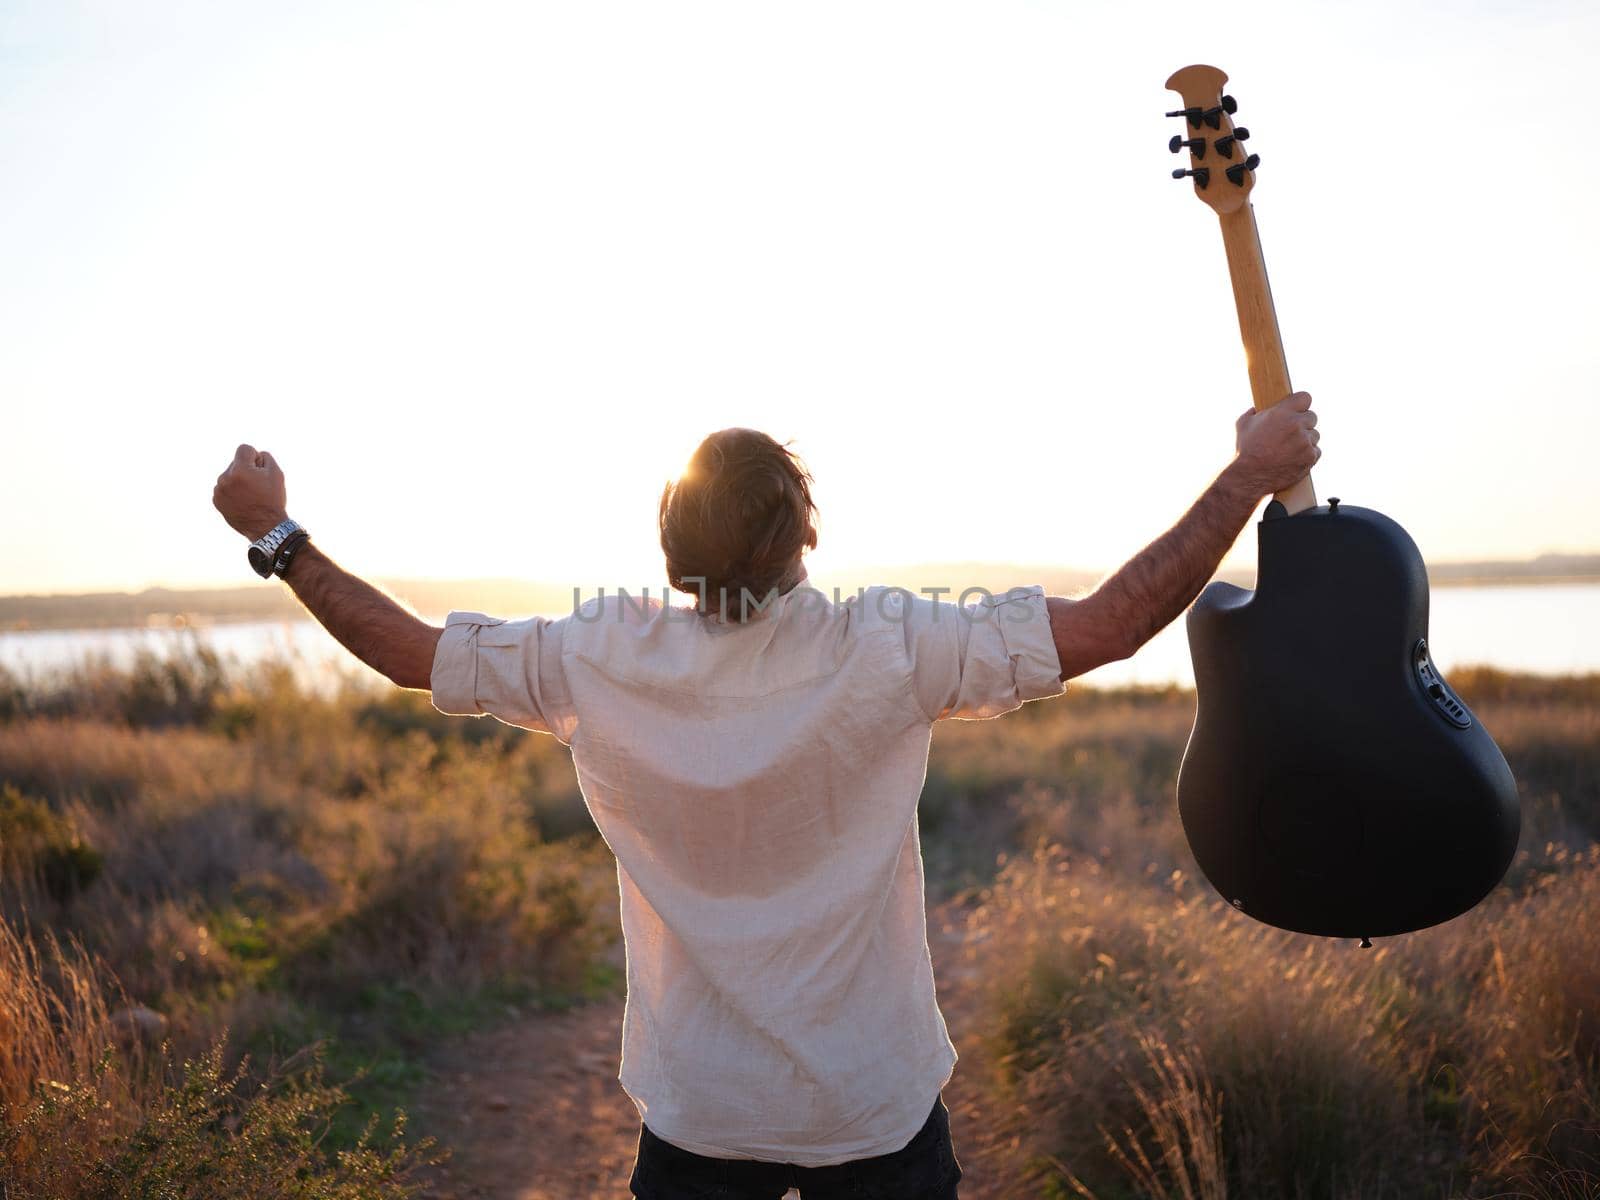 man screaming to the sky his freedom while holding a guitar in his hand up high, horizontal sunset view in the background